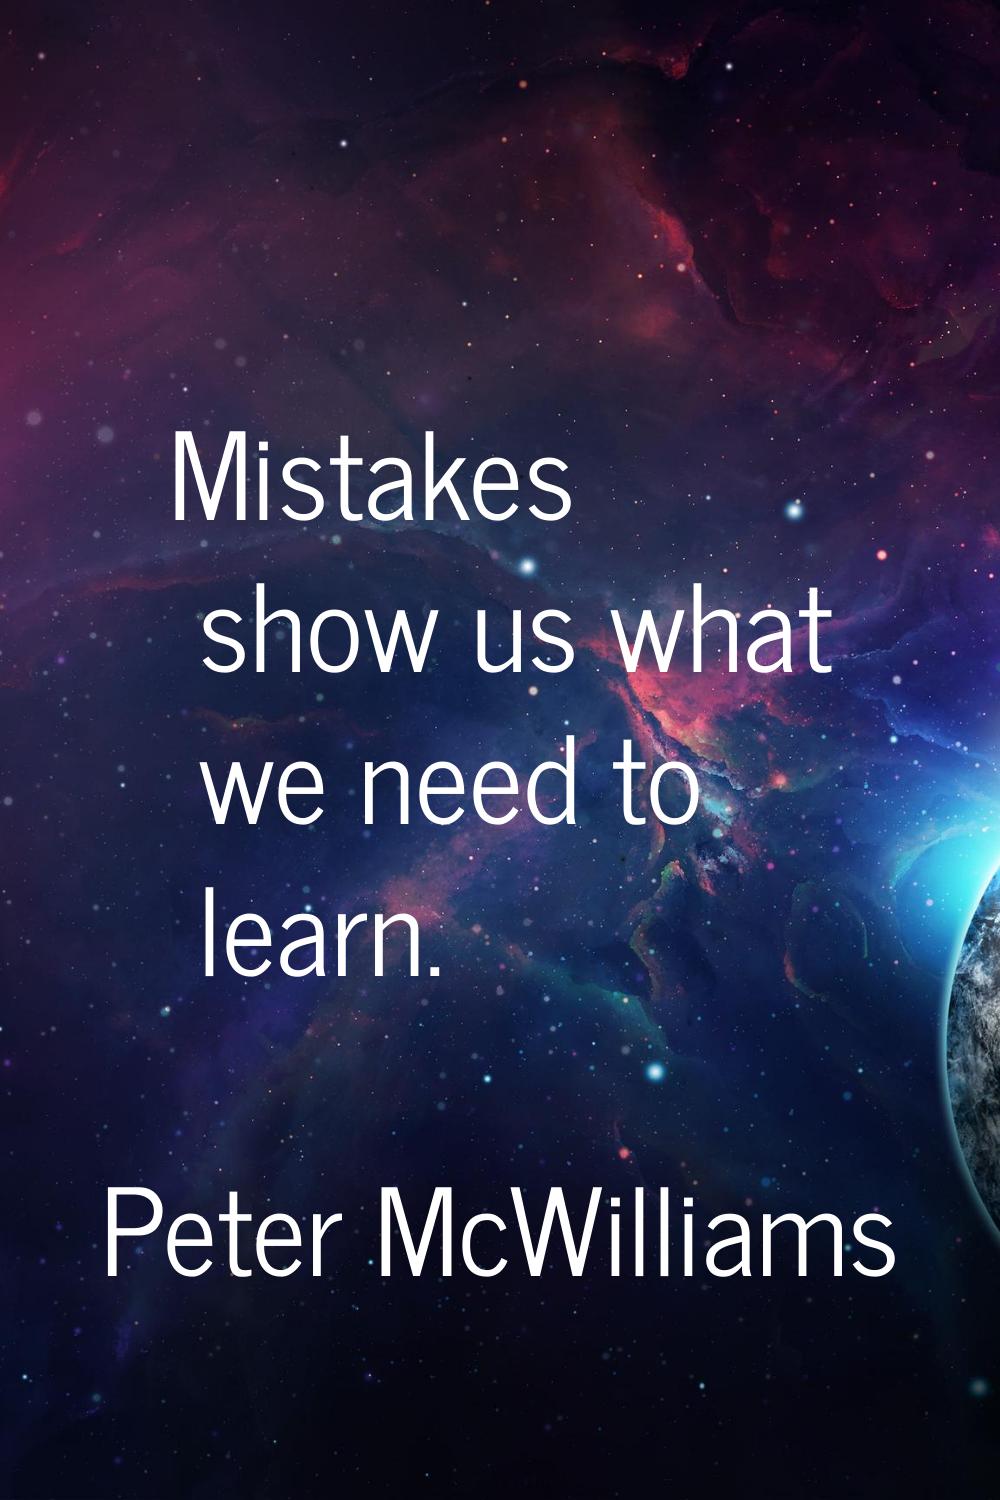 Mistakes show us what we need to learn.